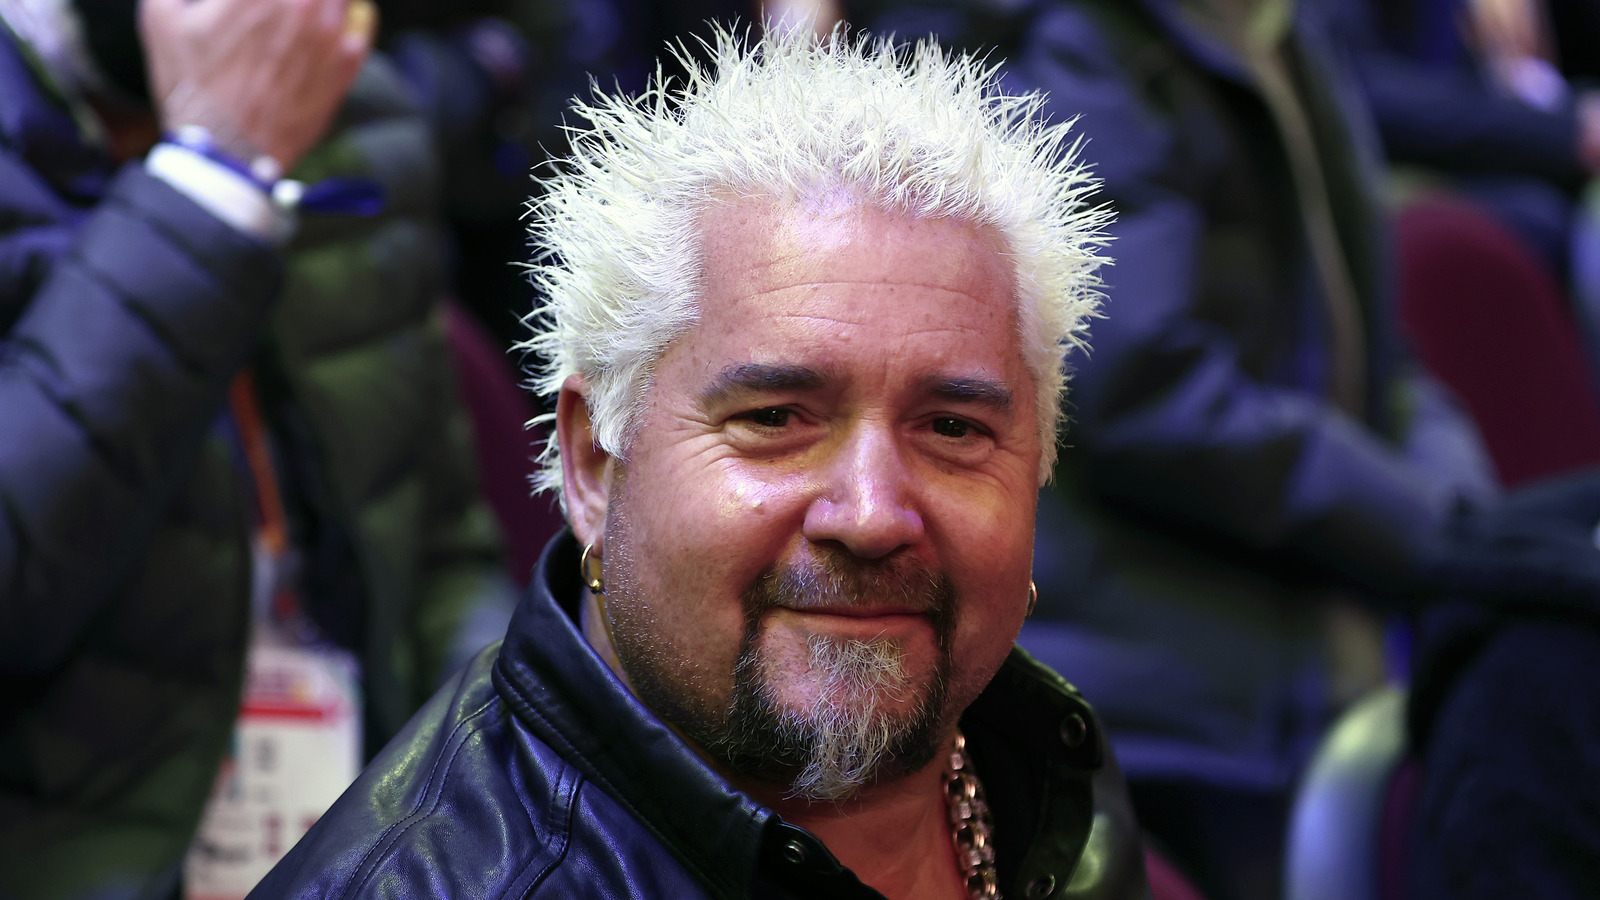 https://www.thedailymeal.com/img/gallery/what-really-happens-when-guy-fieri-doesnt-love-a-dish-on-triple-d/l-intro-1699045383.jpg